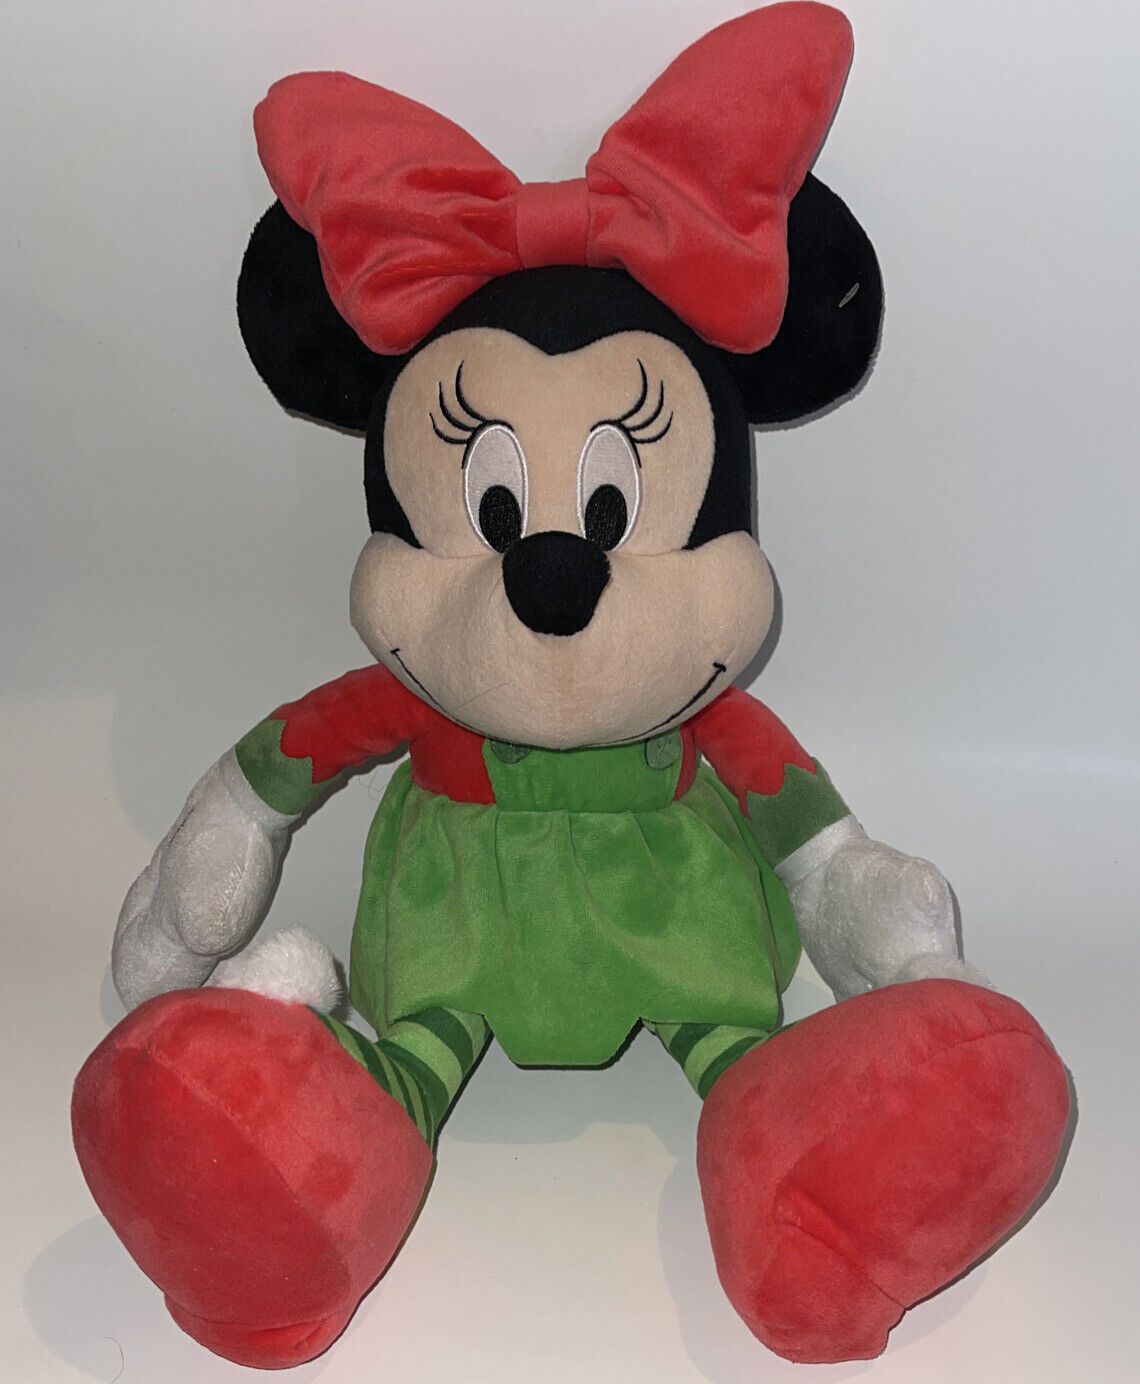 Disney Holiday Christmas 18” Large Plush, Minnie Mouse Just Play Pink Green Nice